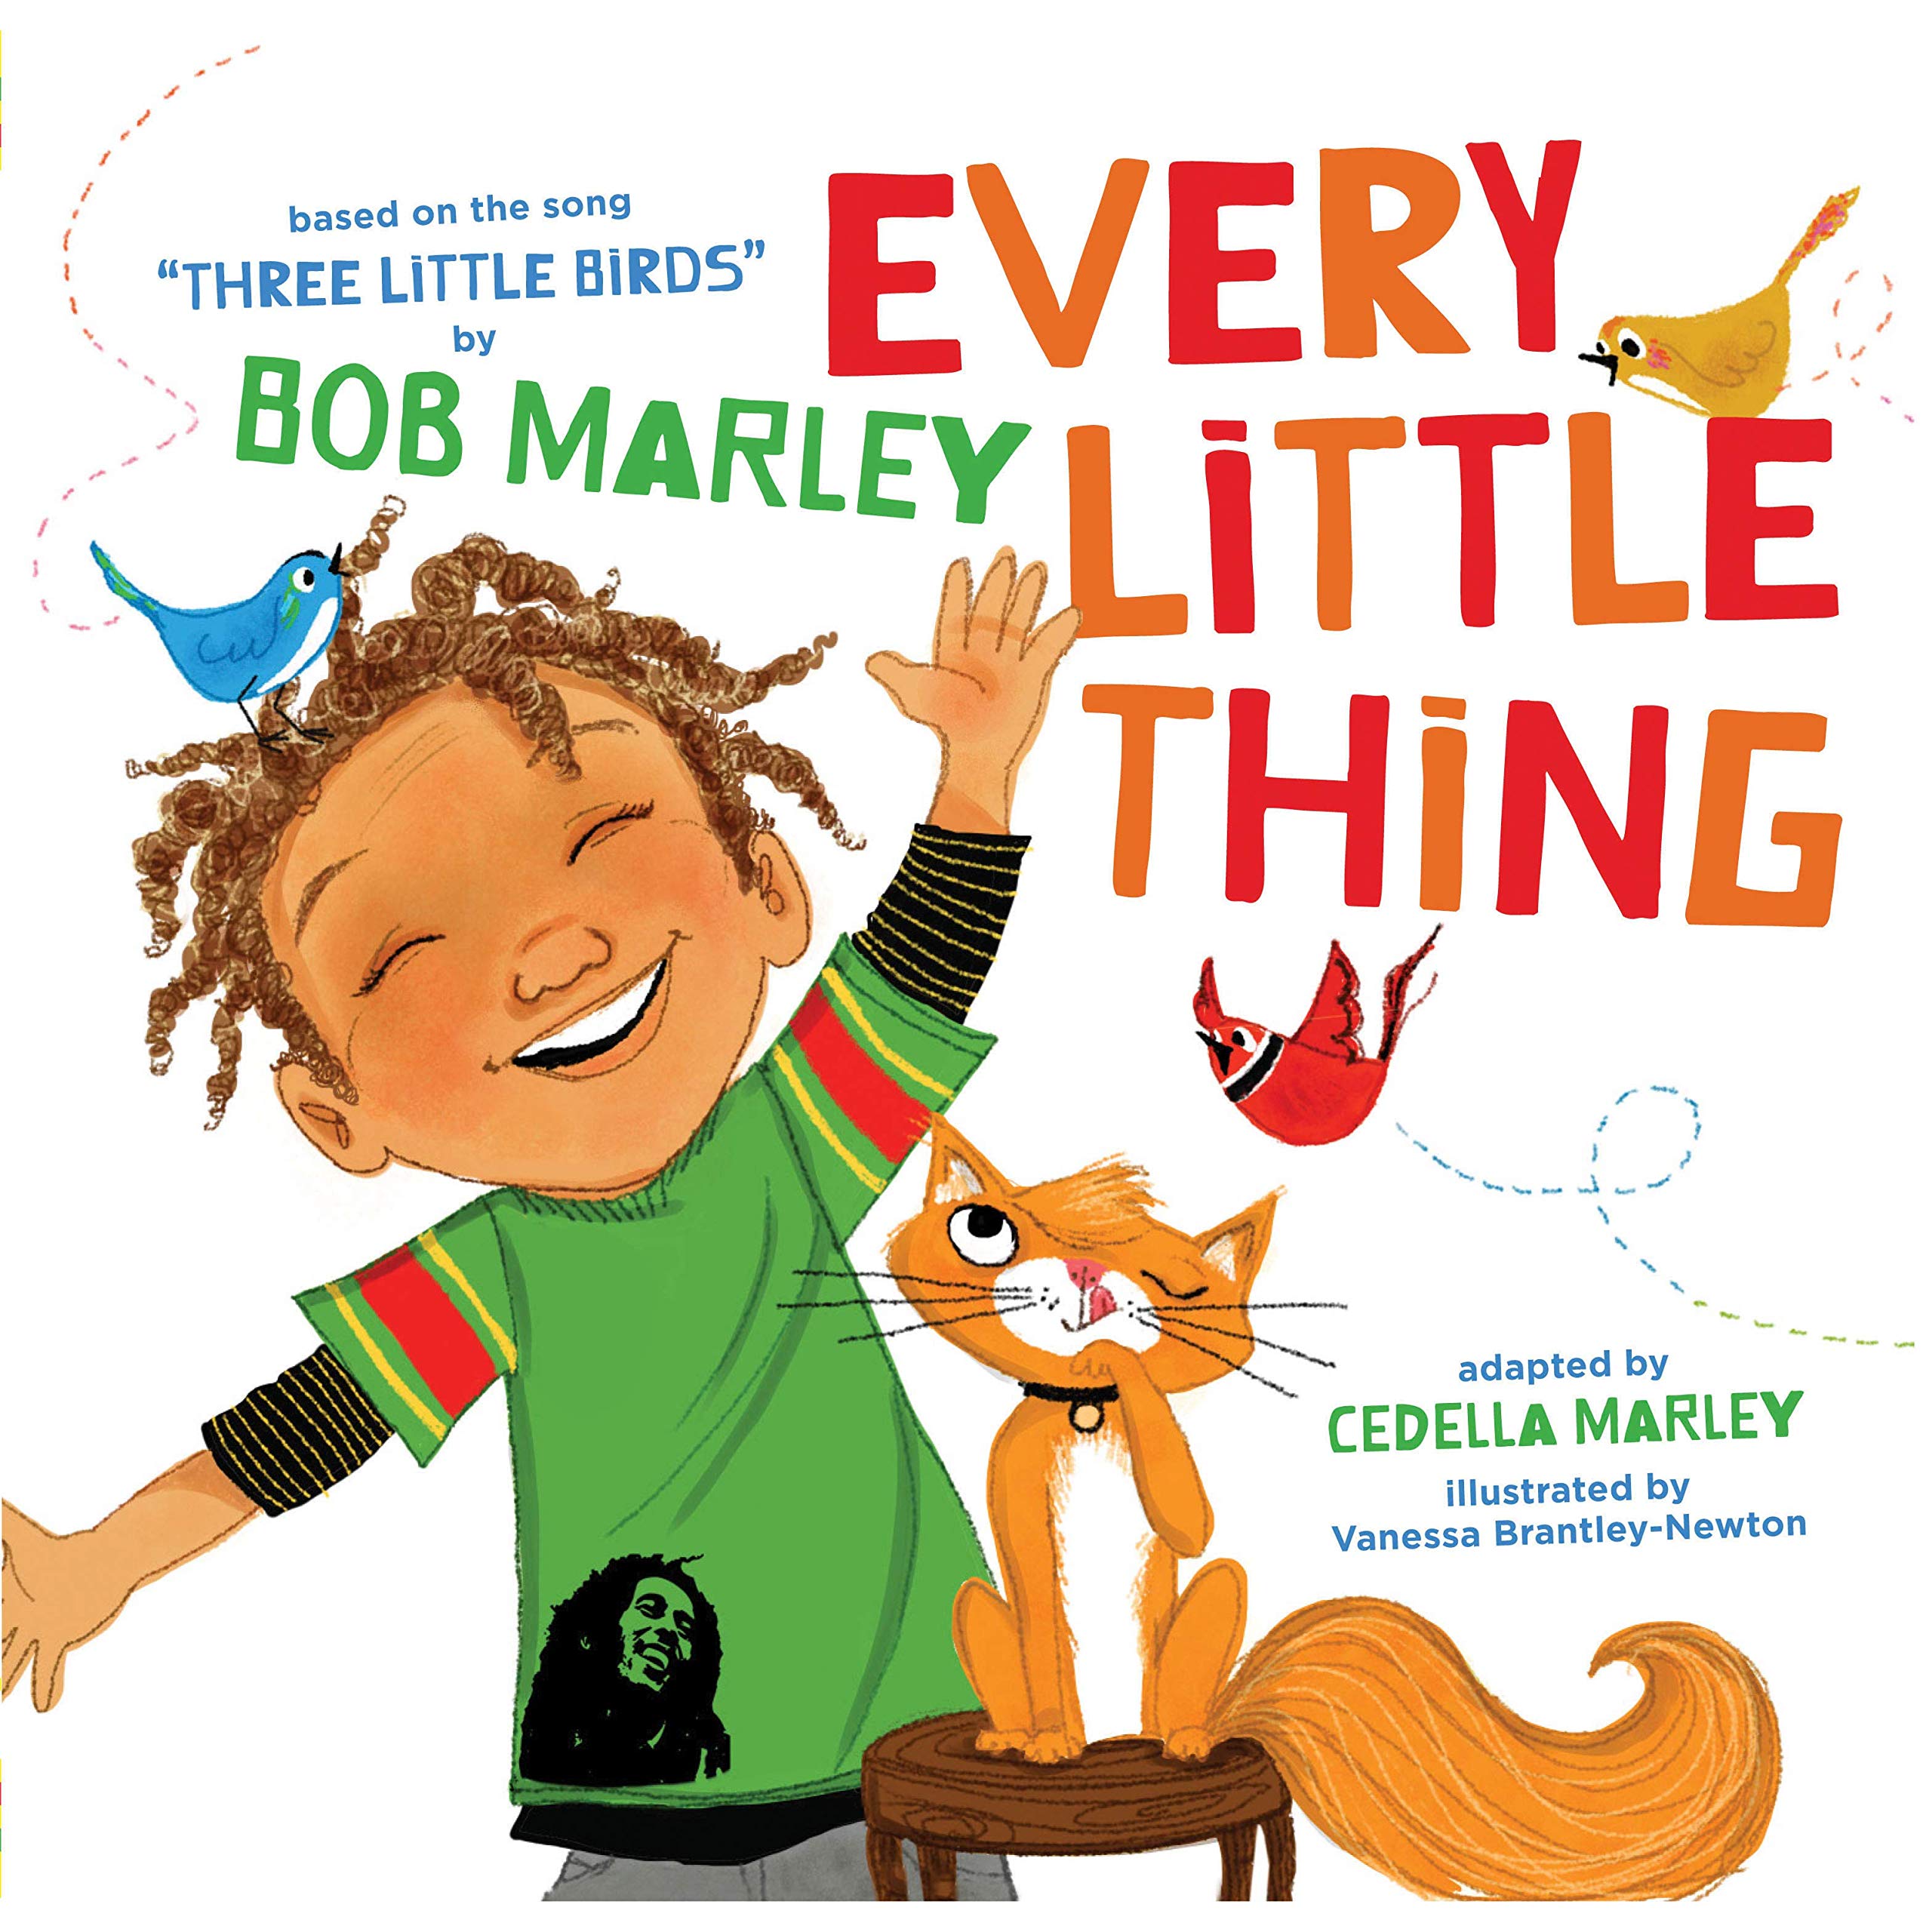 Every Little Thing: Based on the song 'Three Little Birds' by Bob Marley